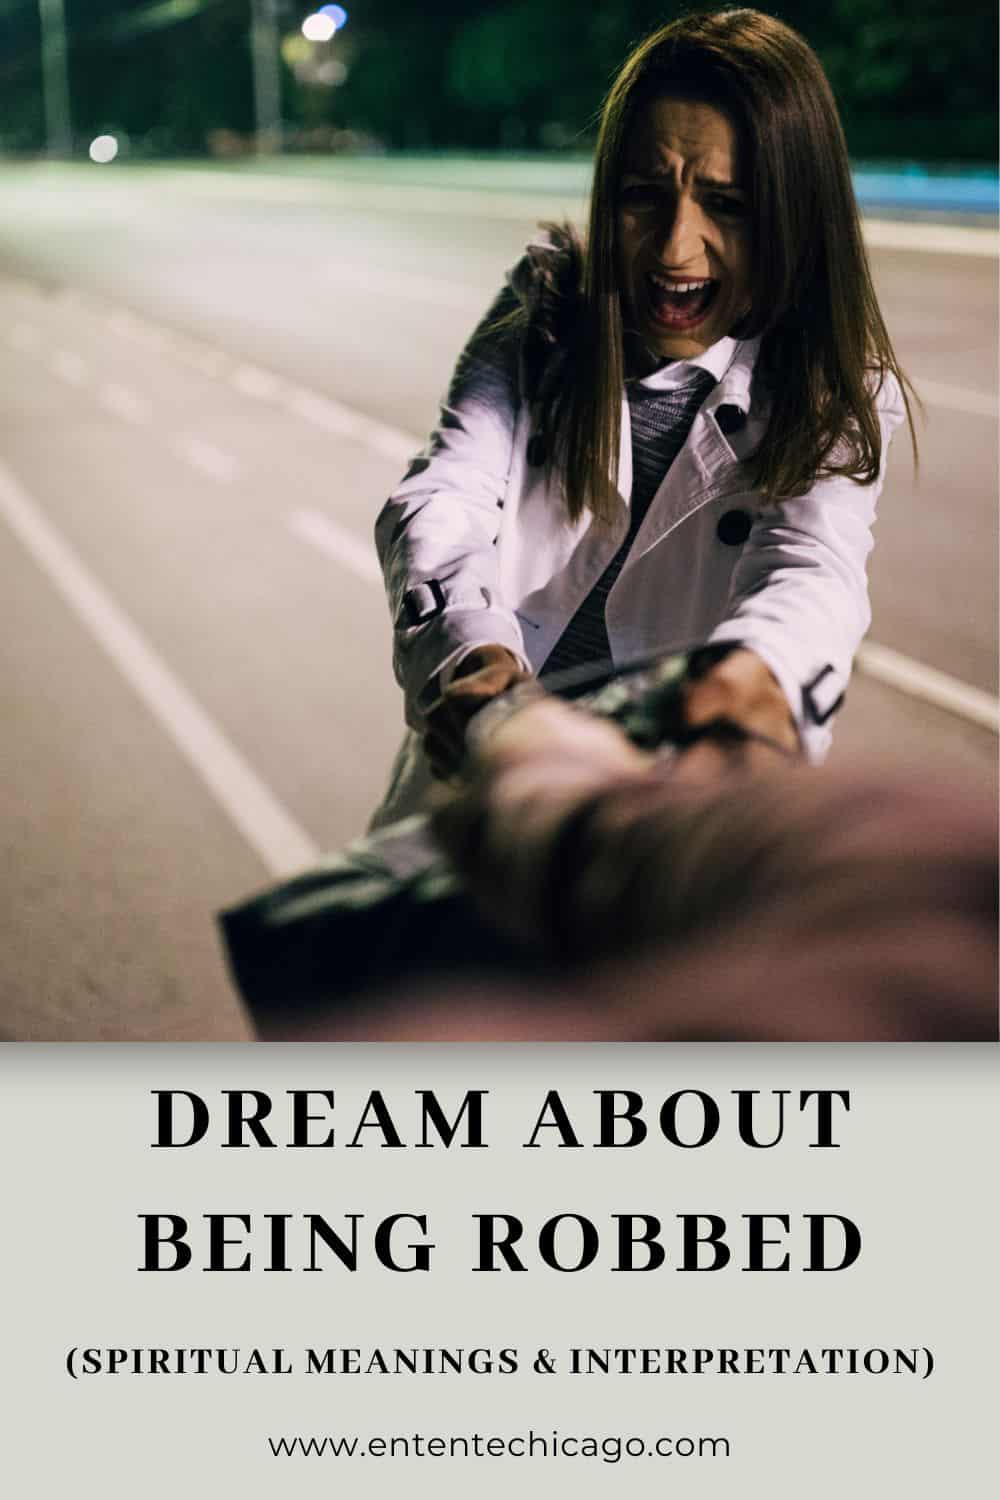 Dream About Being Robbed (Spiritual Meanings & Interpretation)